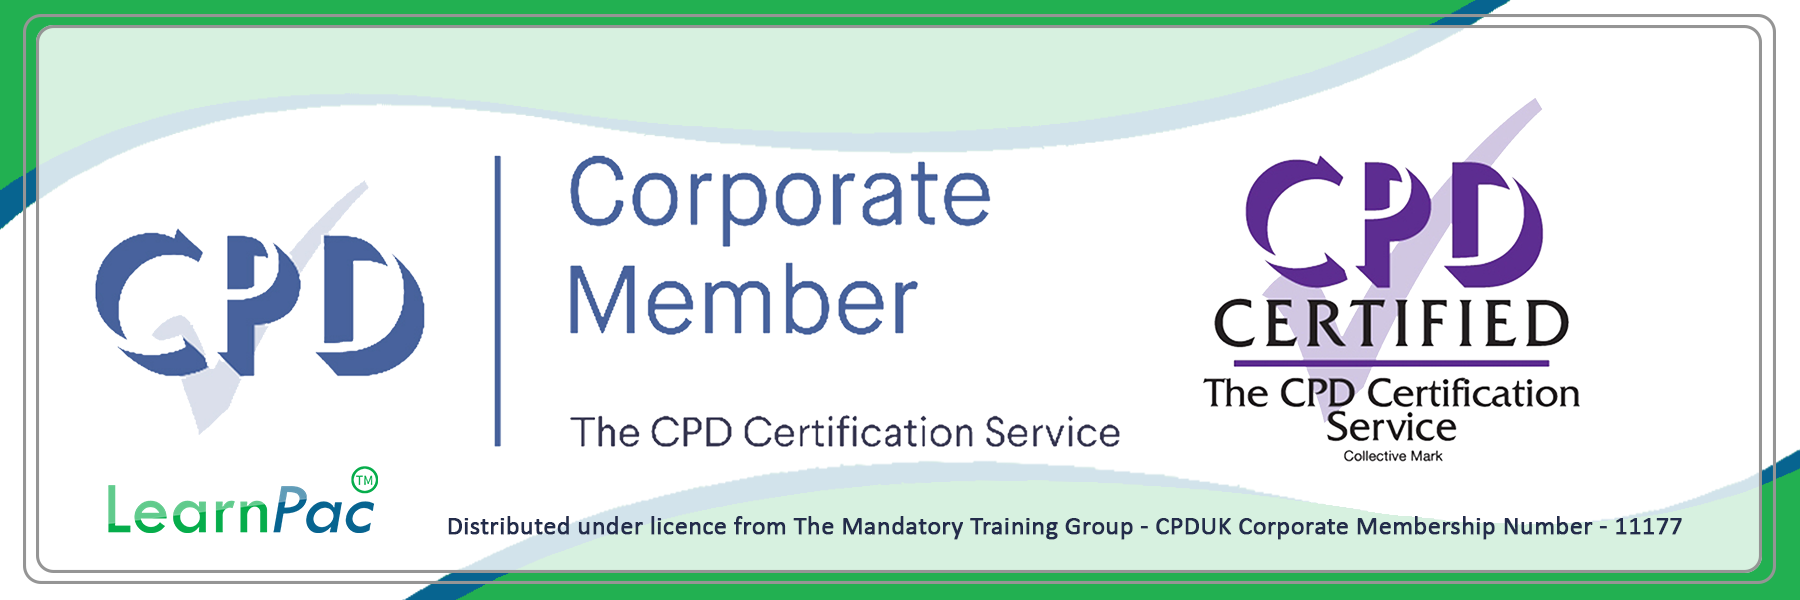 Mental Health Act - E-Learning Courses with Certificates - CPD Certified - LearnPac Systems UK -